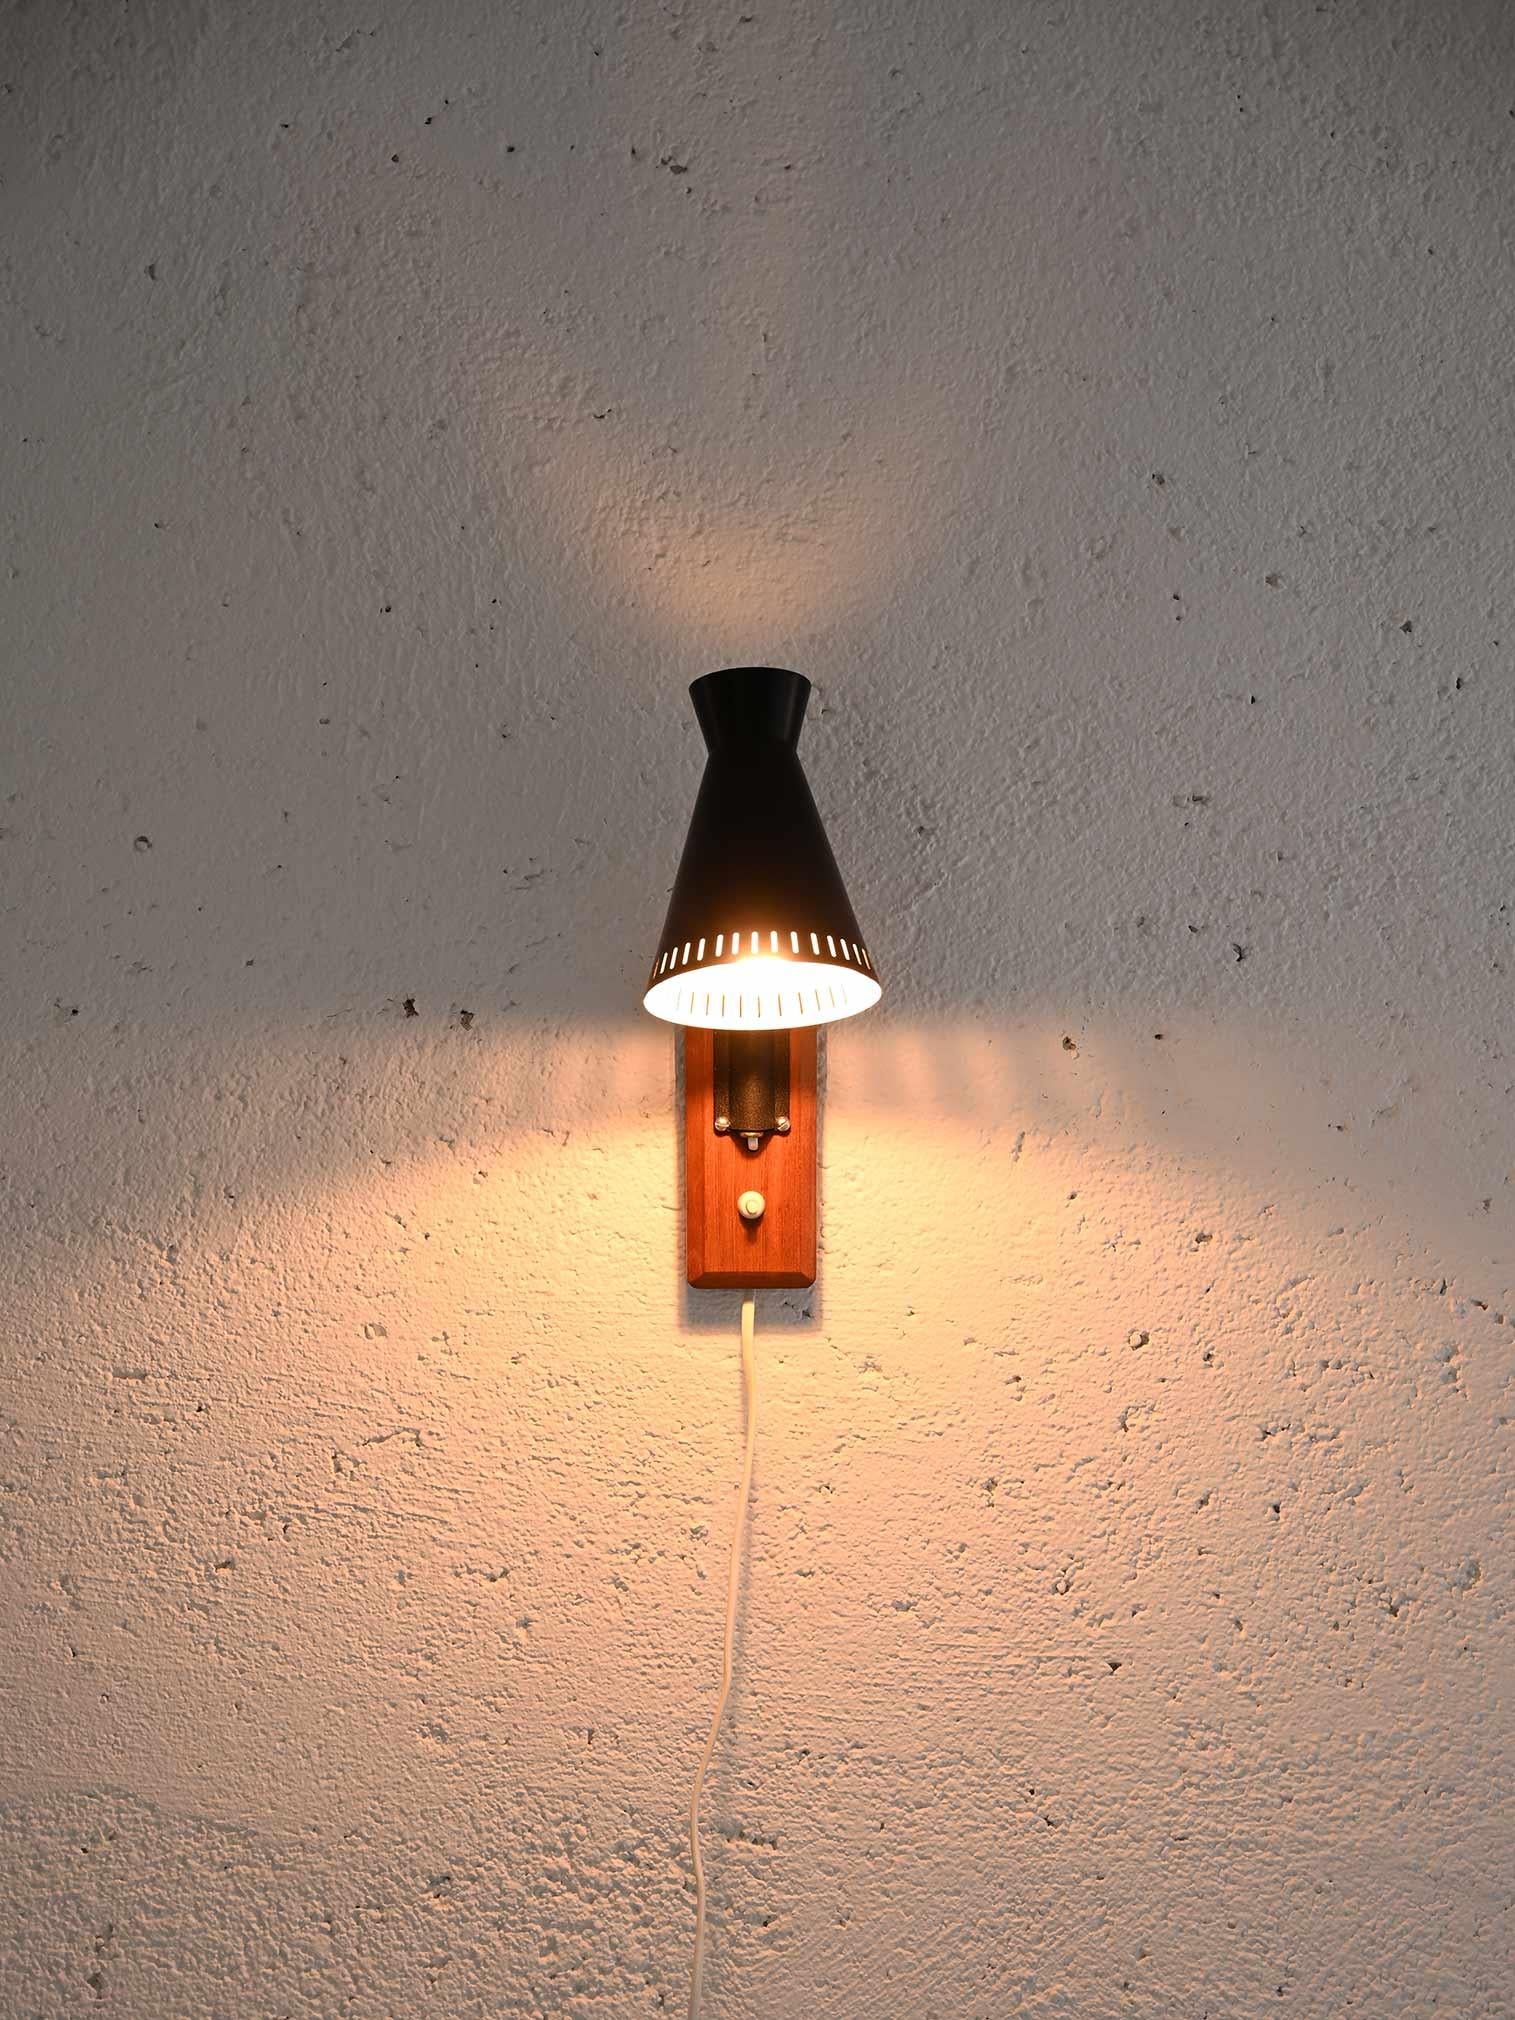 1960s wall lamp.

Particular wall sconce consisting of the black-painted sheet metal shade and a brass arm supported by the teak base that conceals the electrical part.
A lamp with a vintage flavor that can be used to characterize the bedroom,